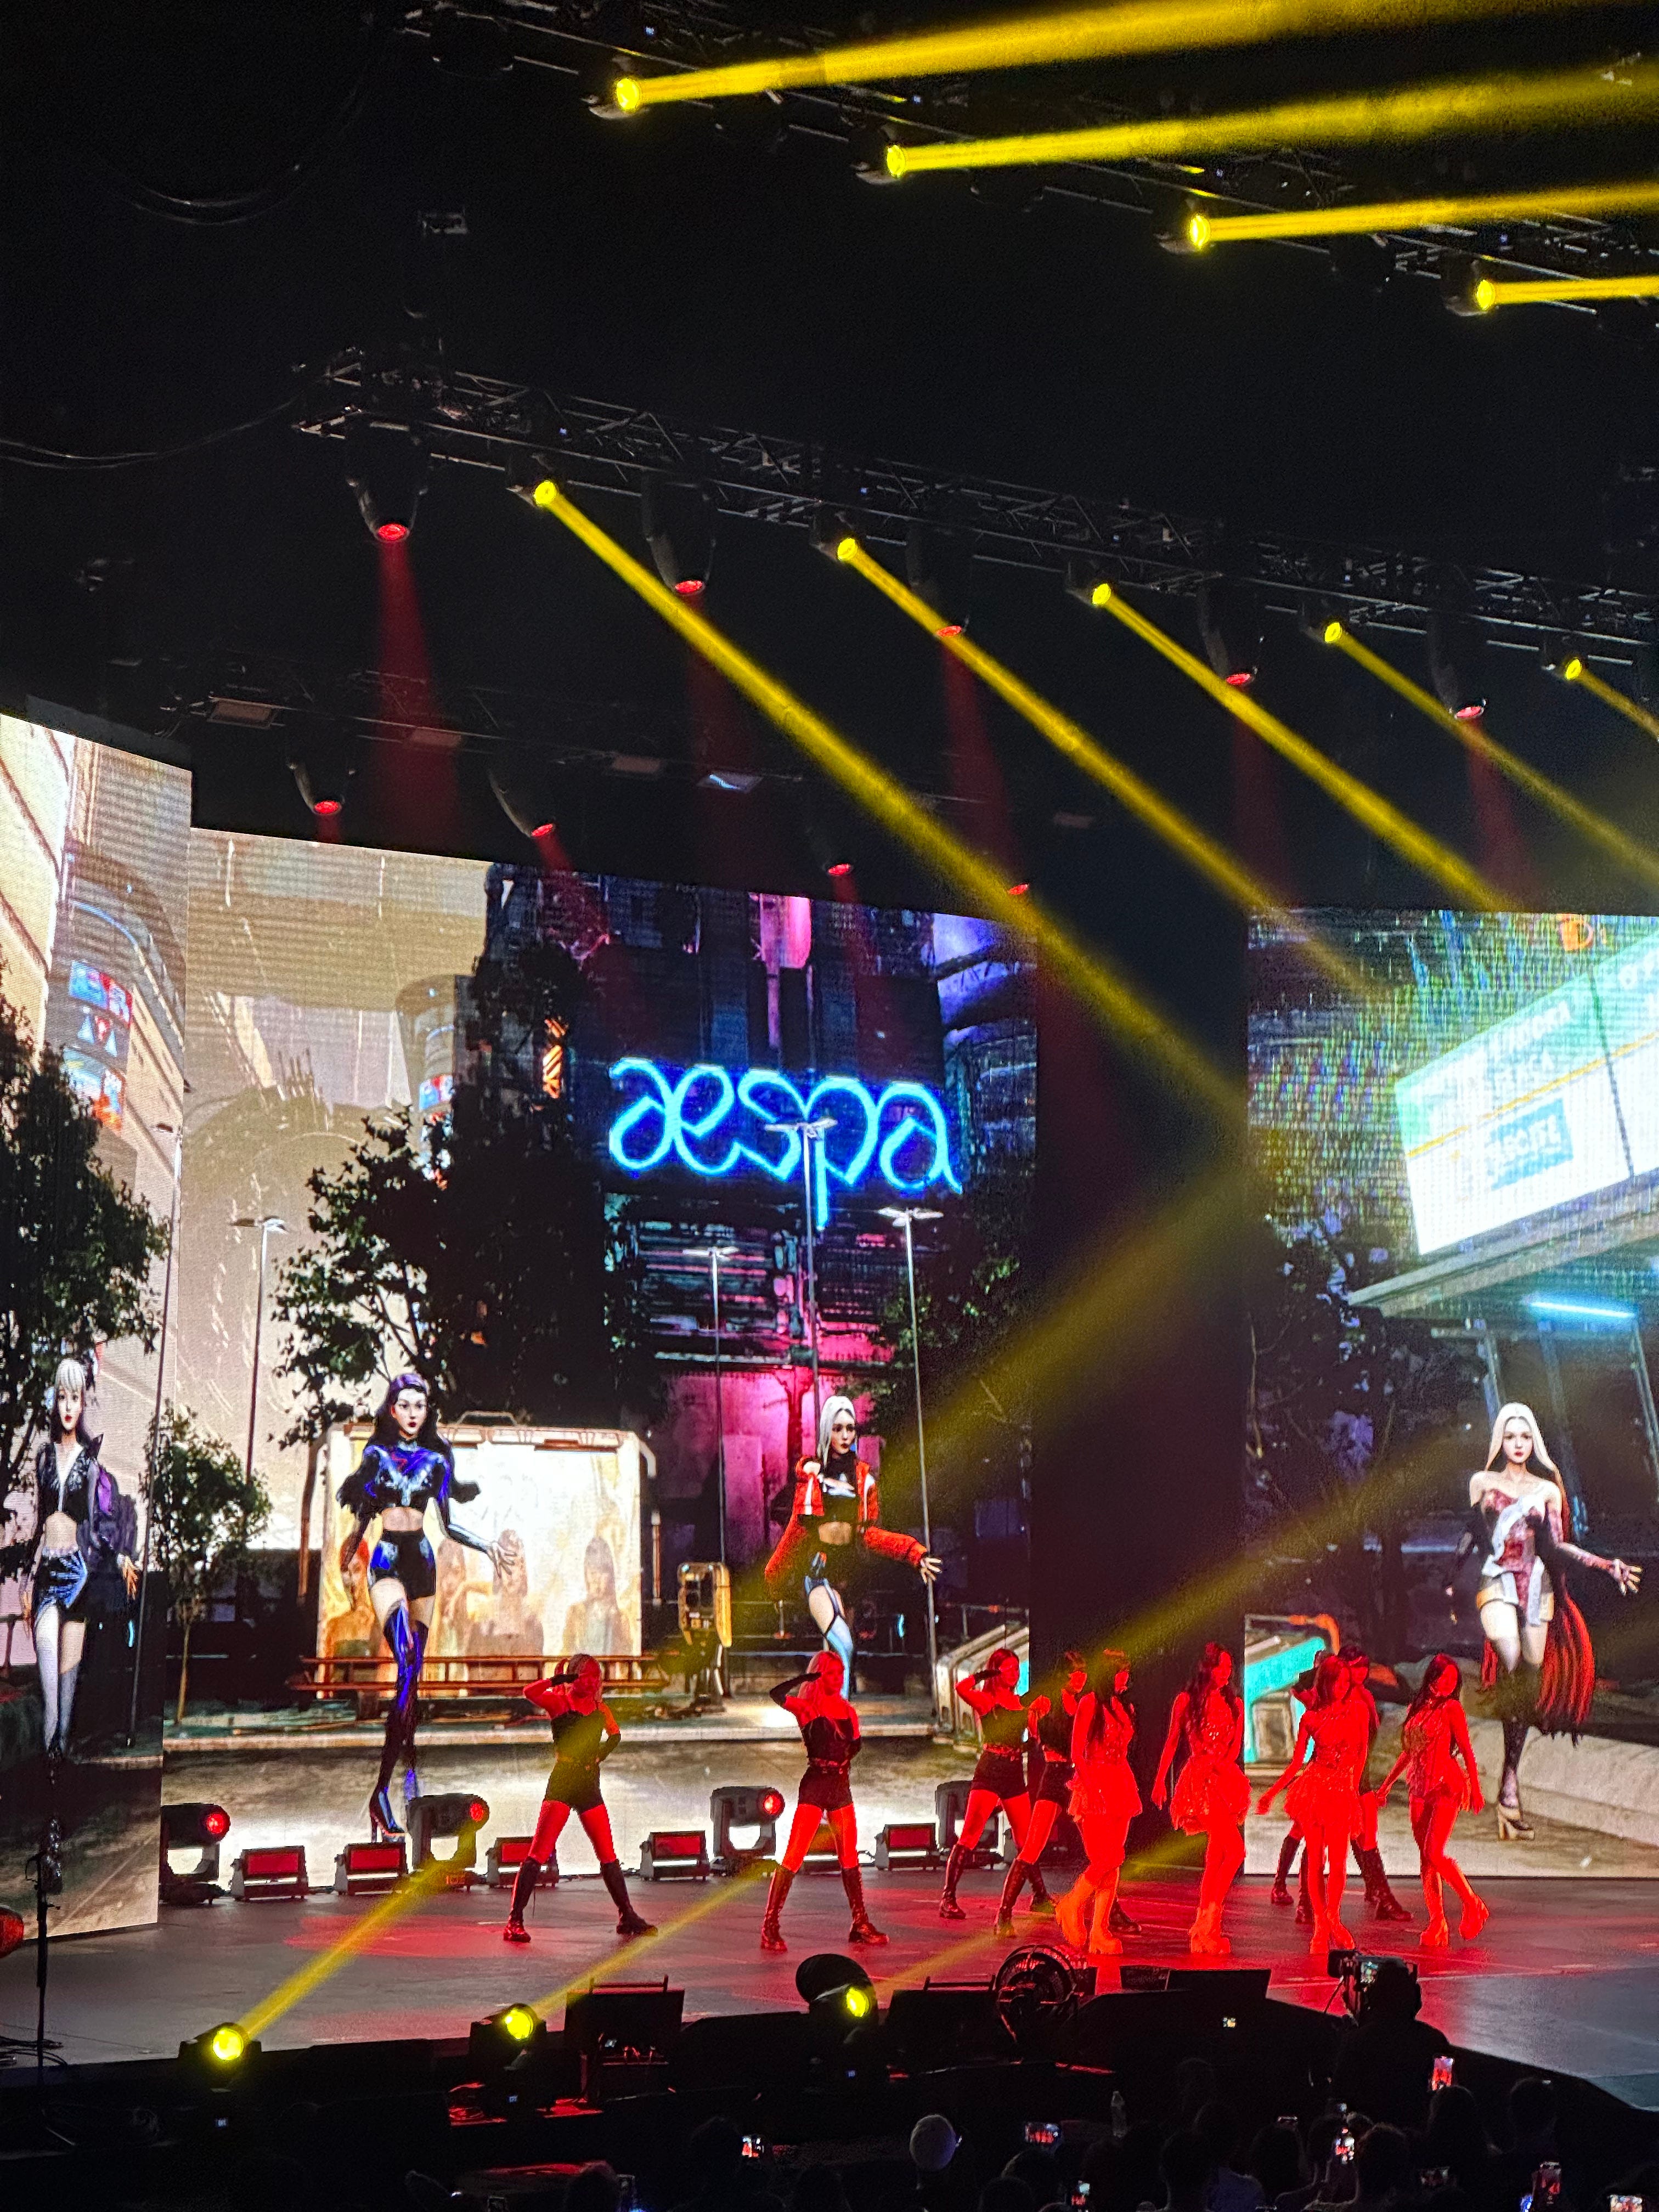 photo of aespa and their dancers performing on stage, wit their logo and ae's on screenbehind them